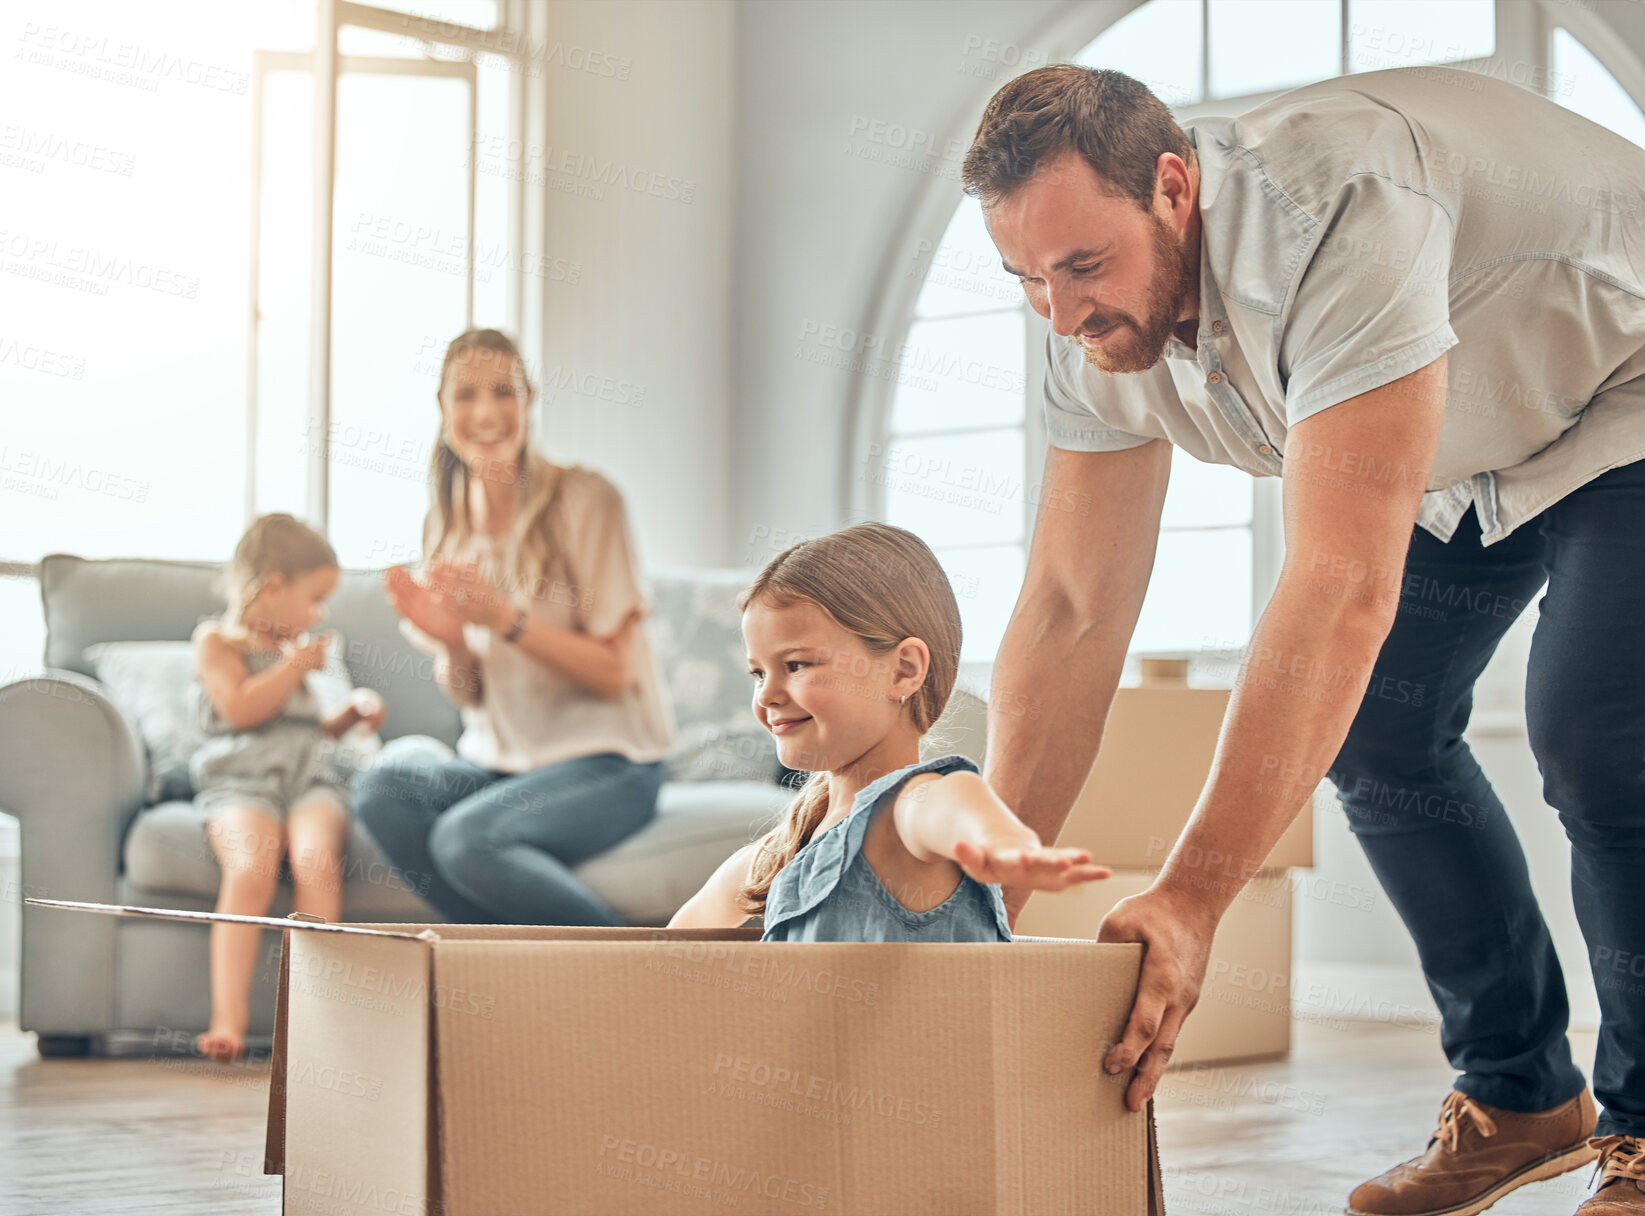 Buy stock photo A happy mature caucasian father pushing his daughter in a box while her mother and sister sit on the sofa in the lounge at home. Man and girl having fun, playing games at home while enjoying family bonding. Family looking overjoyed in their new home